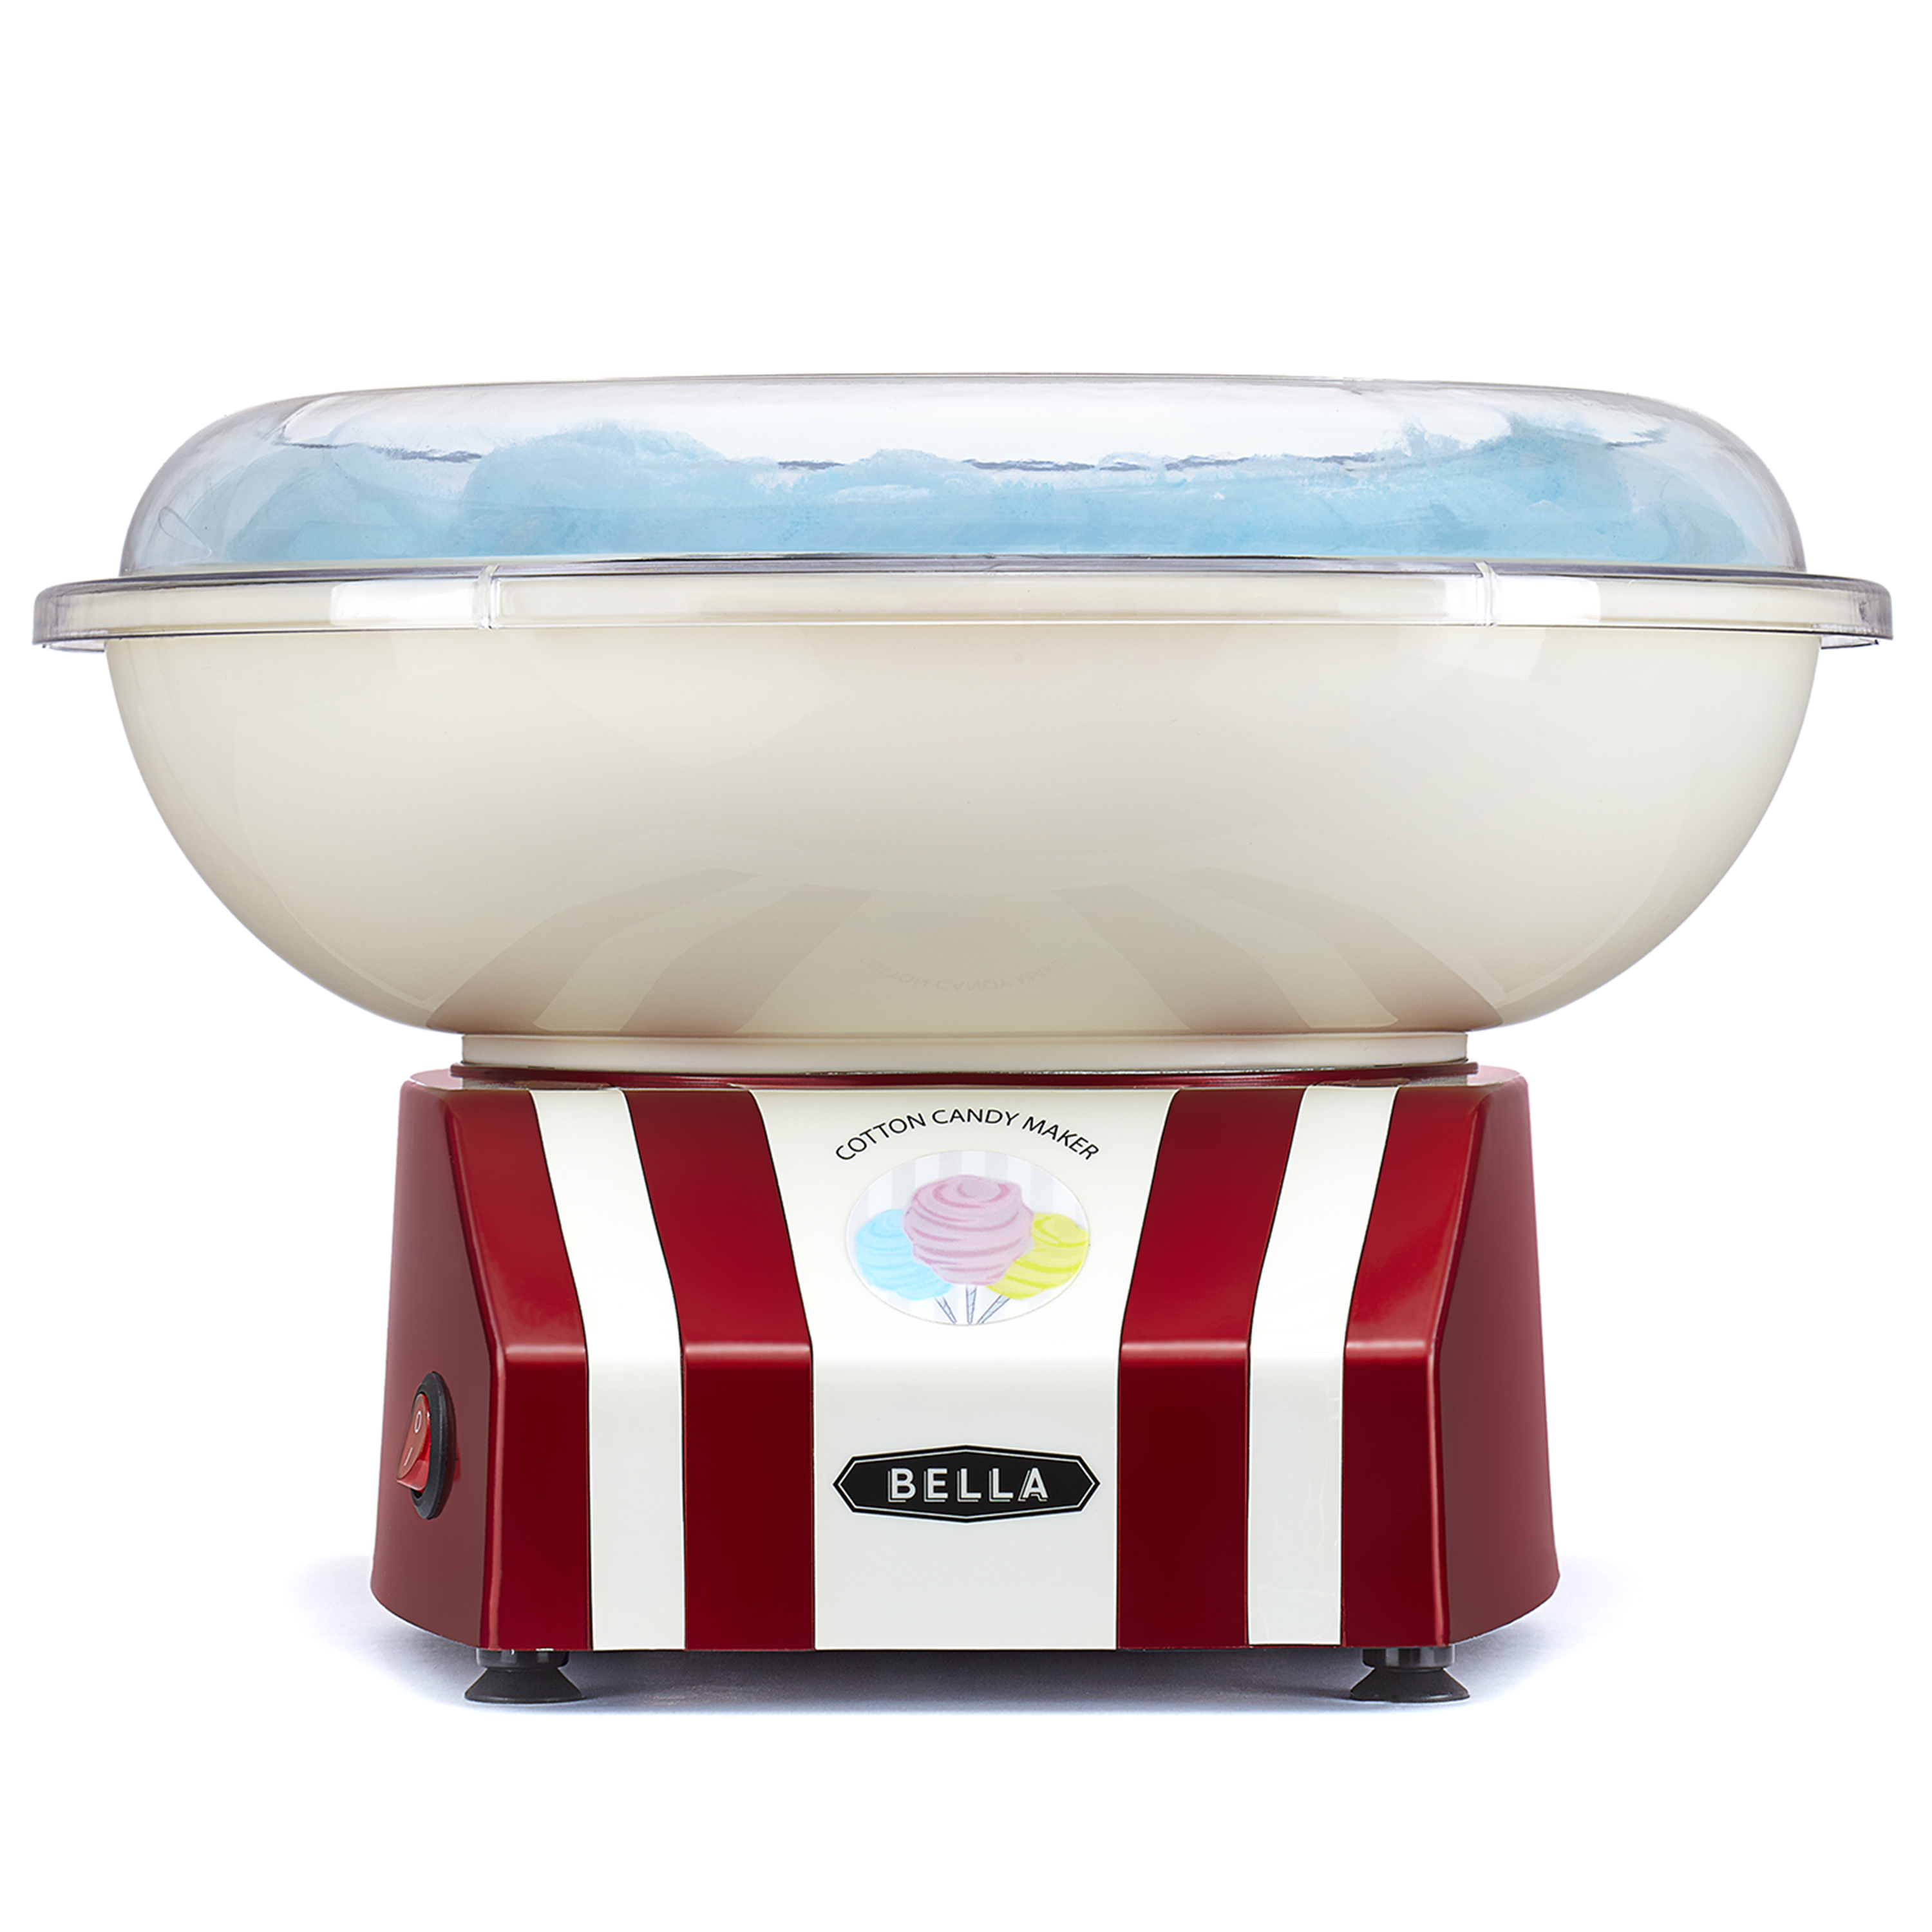 BELLA Electrically Powered Cotton Candy Maker, 475-Watt, Red & White - image 1 of 15